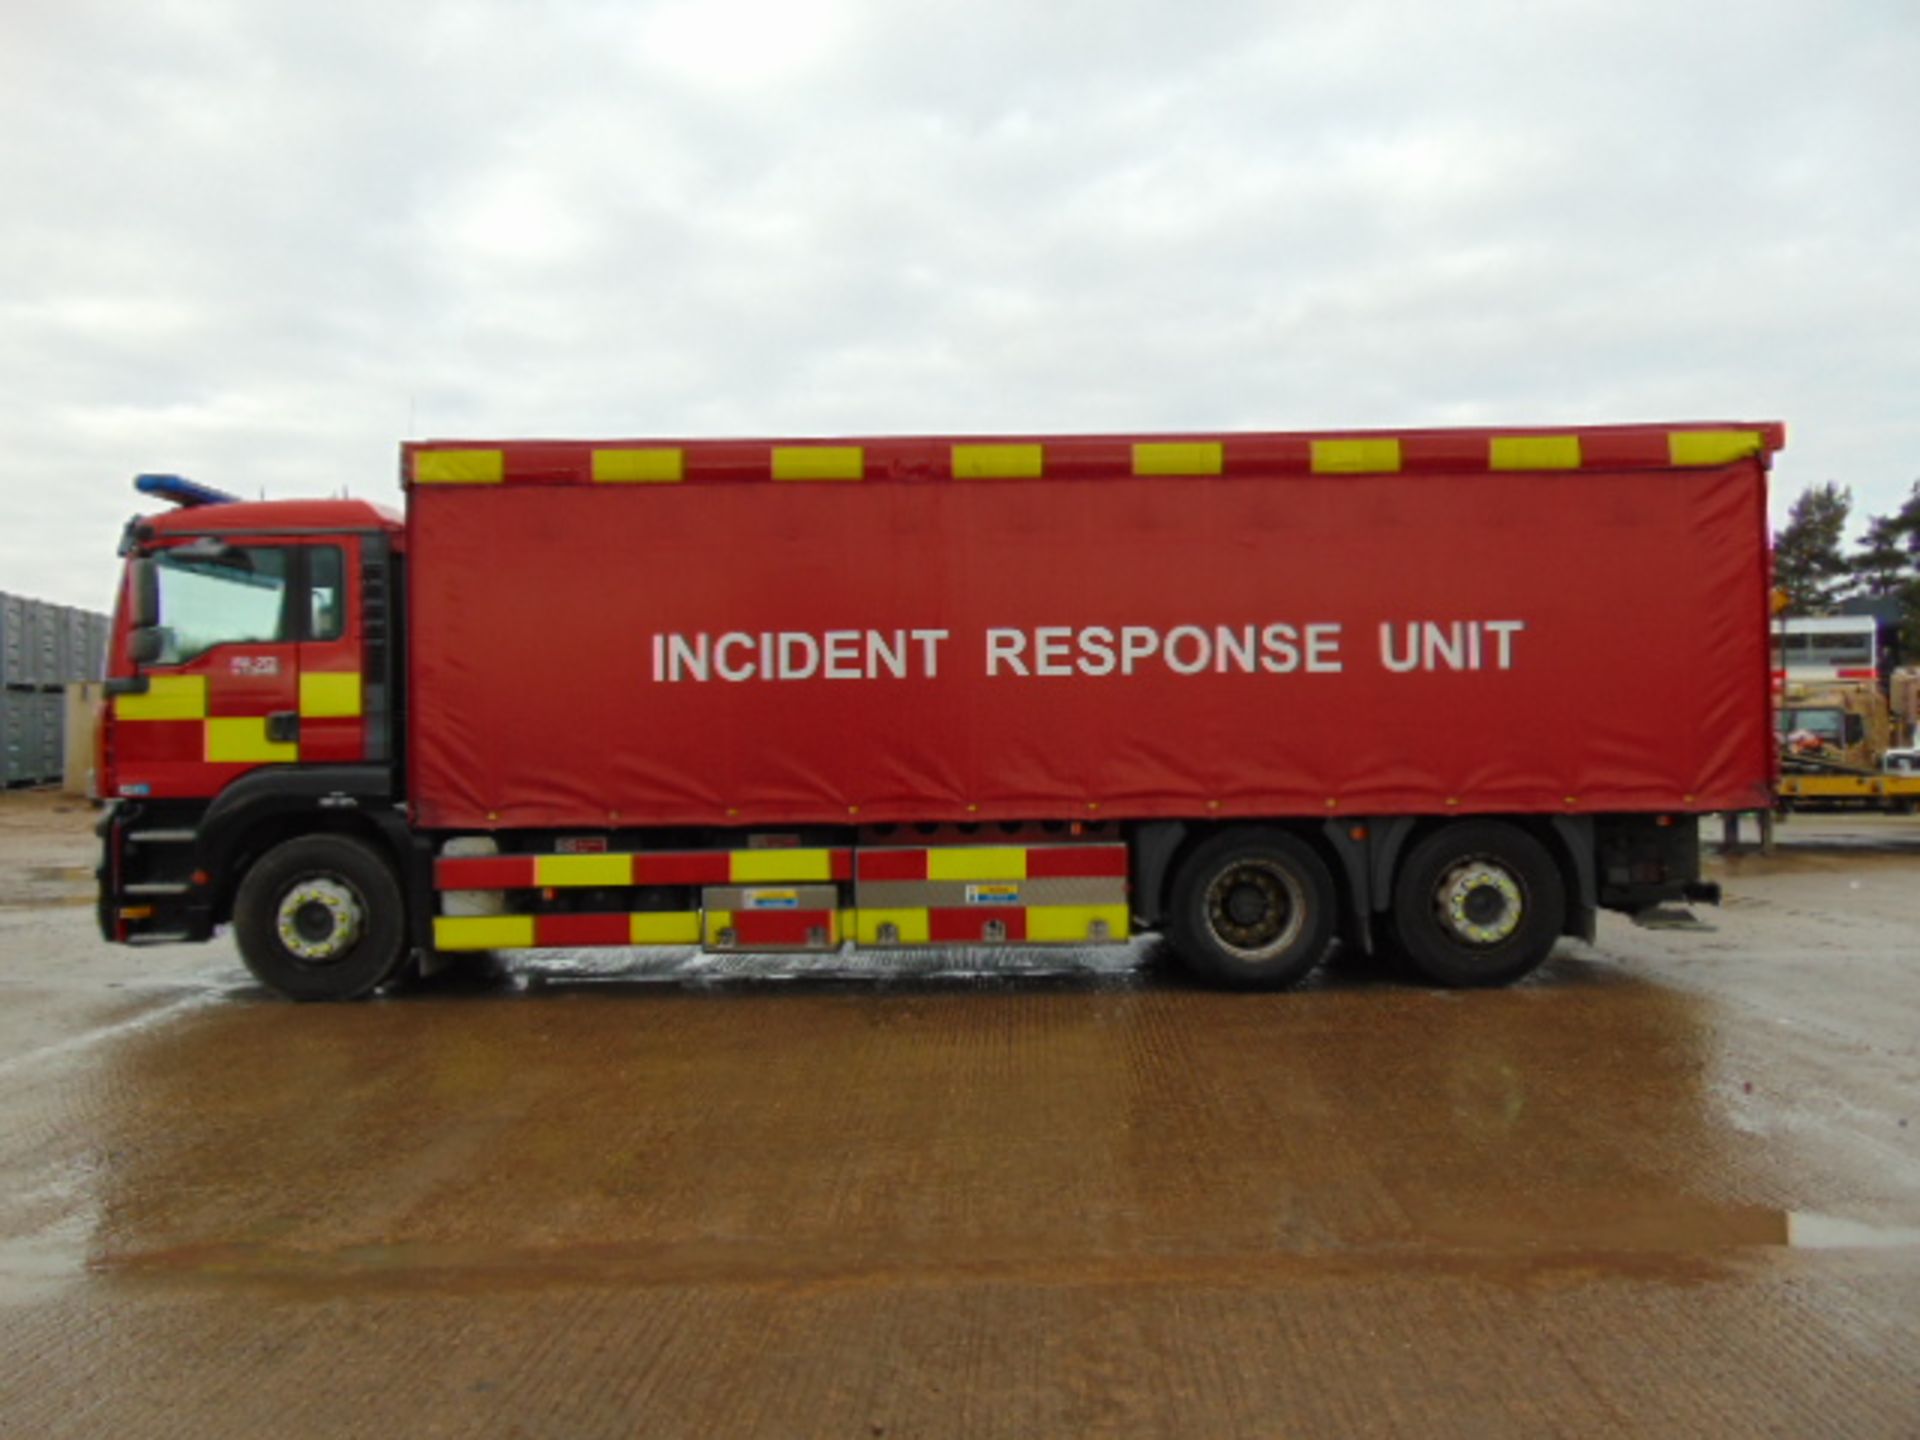 2004 MAN TG-A 6x2 Incident Support Unit - Image 4 of 26